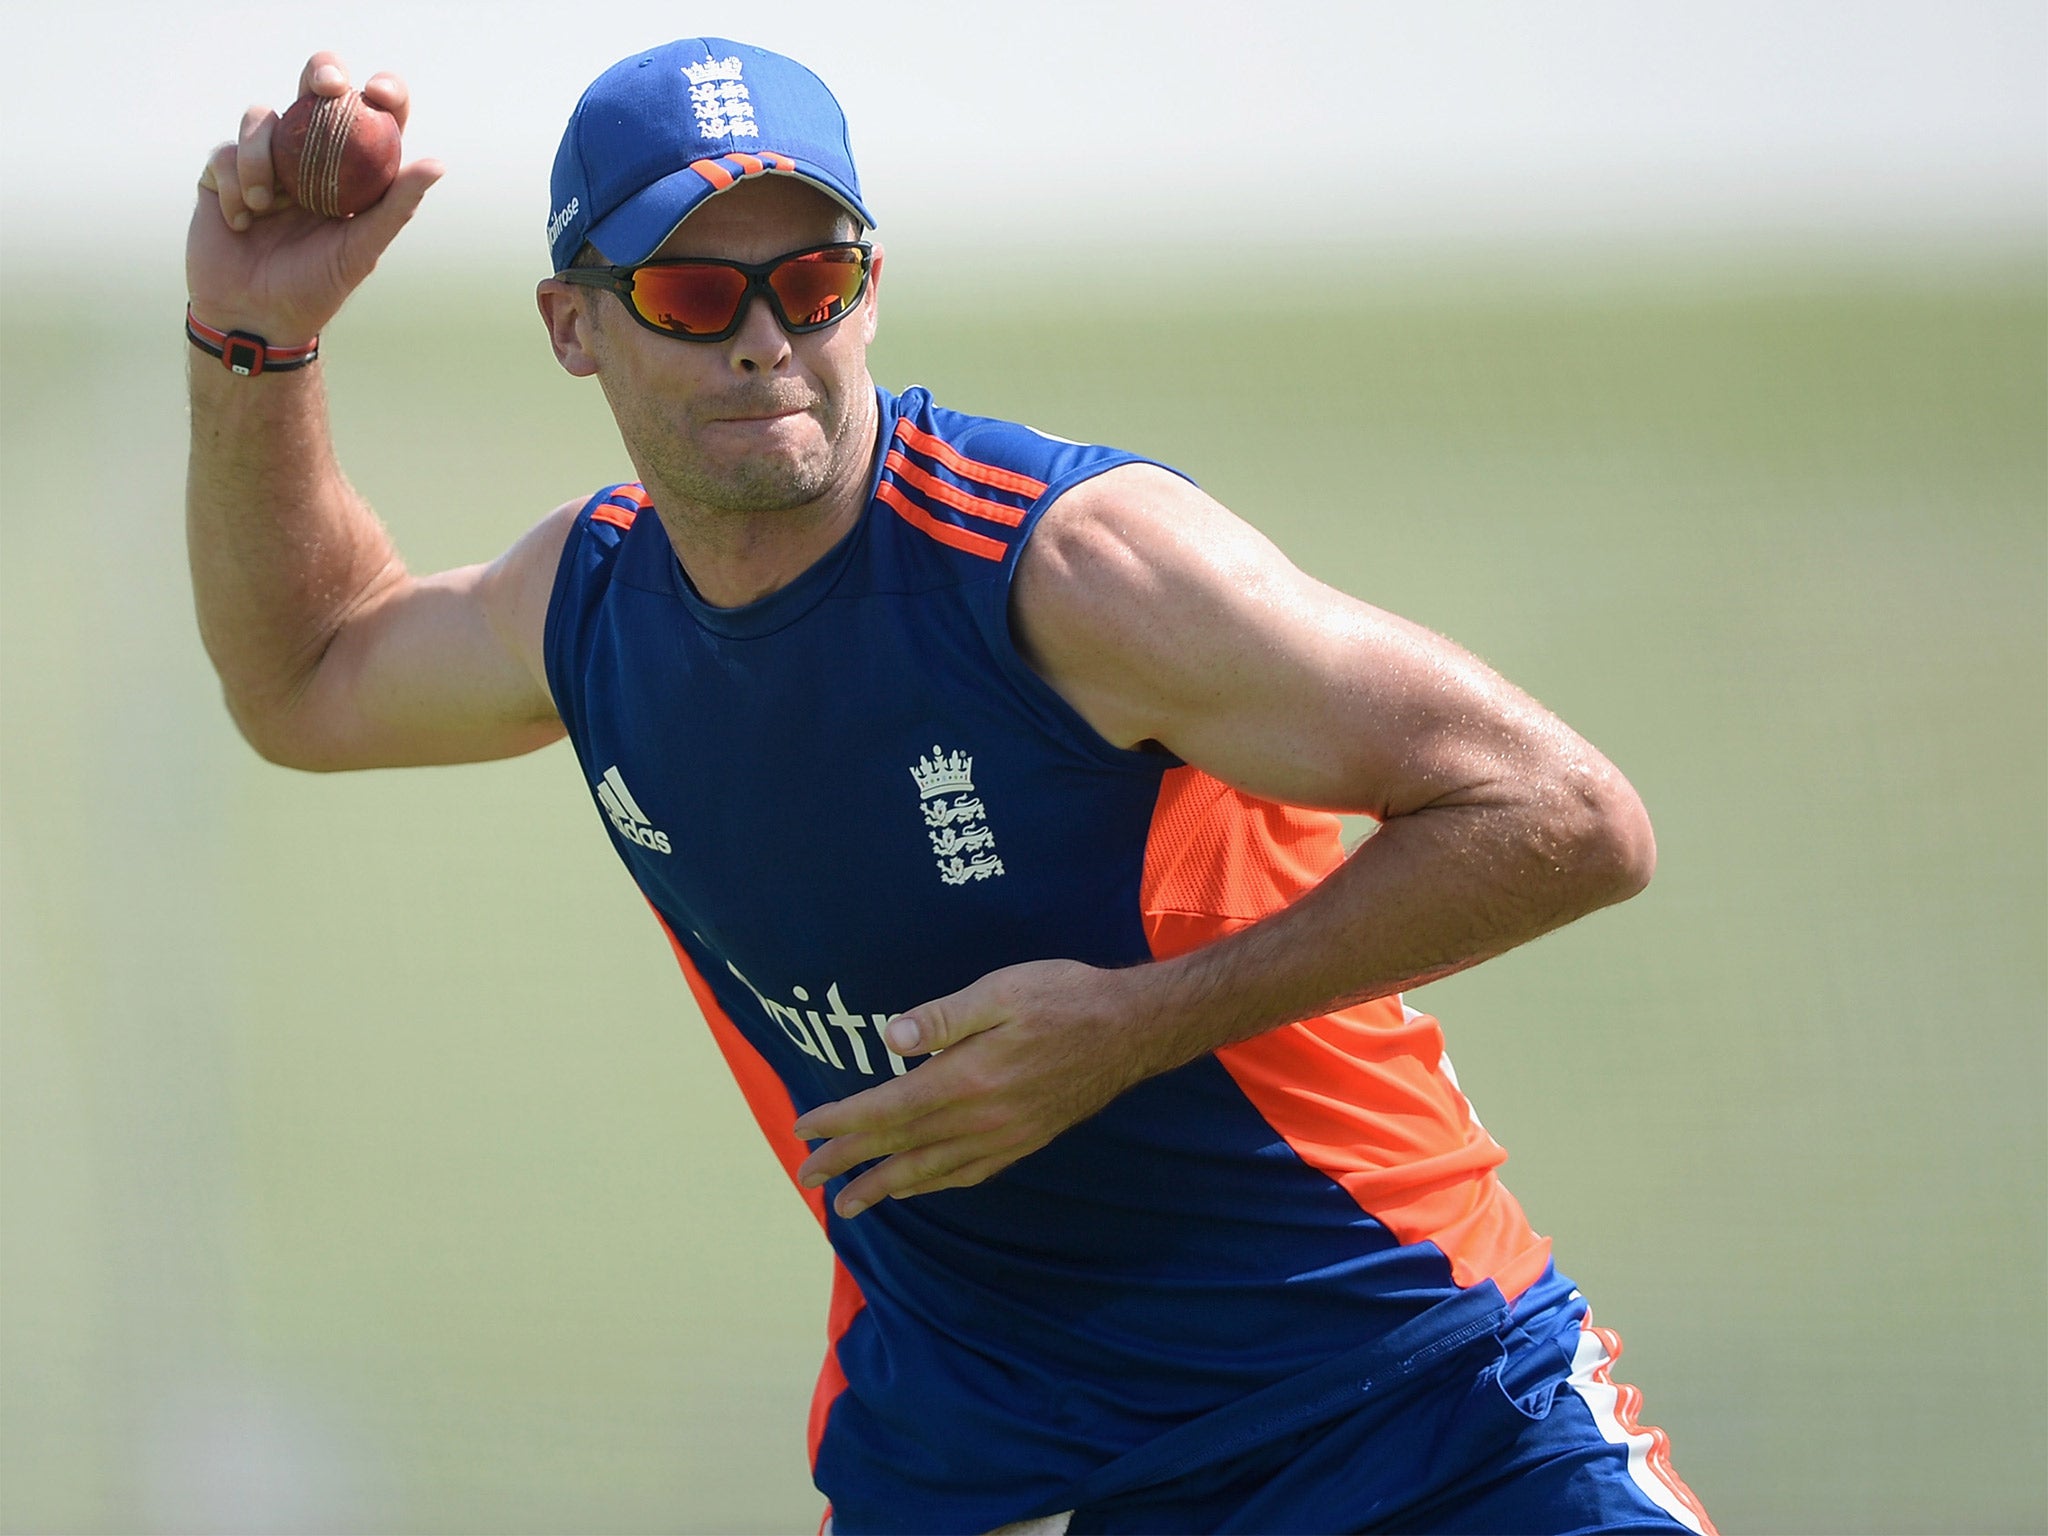 Jimmy Anderson says that trying to bowl reverse swing is a ‘real test, and quite good fun’